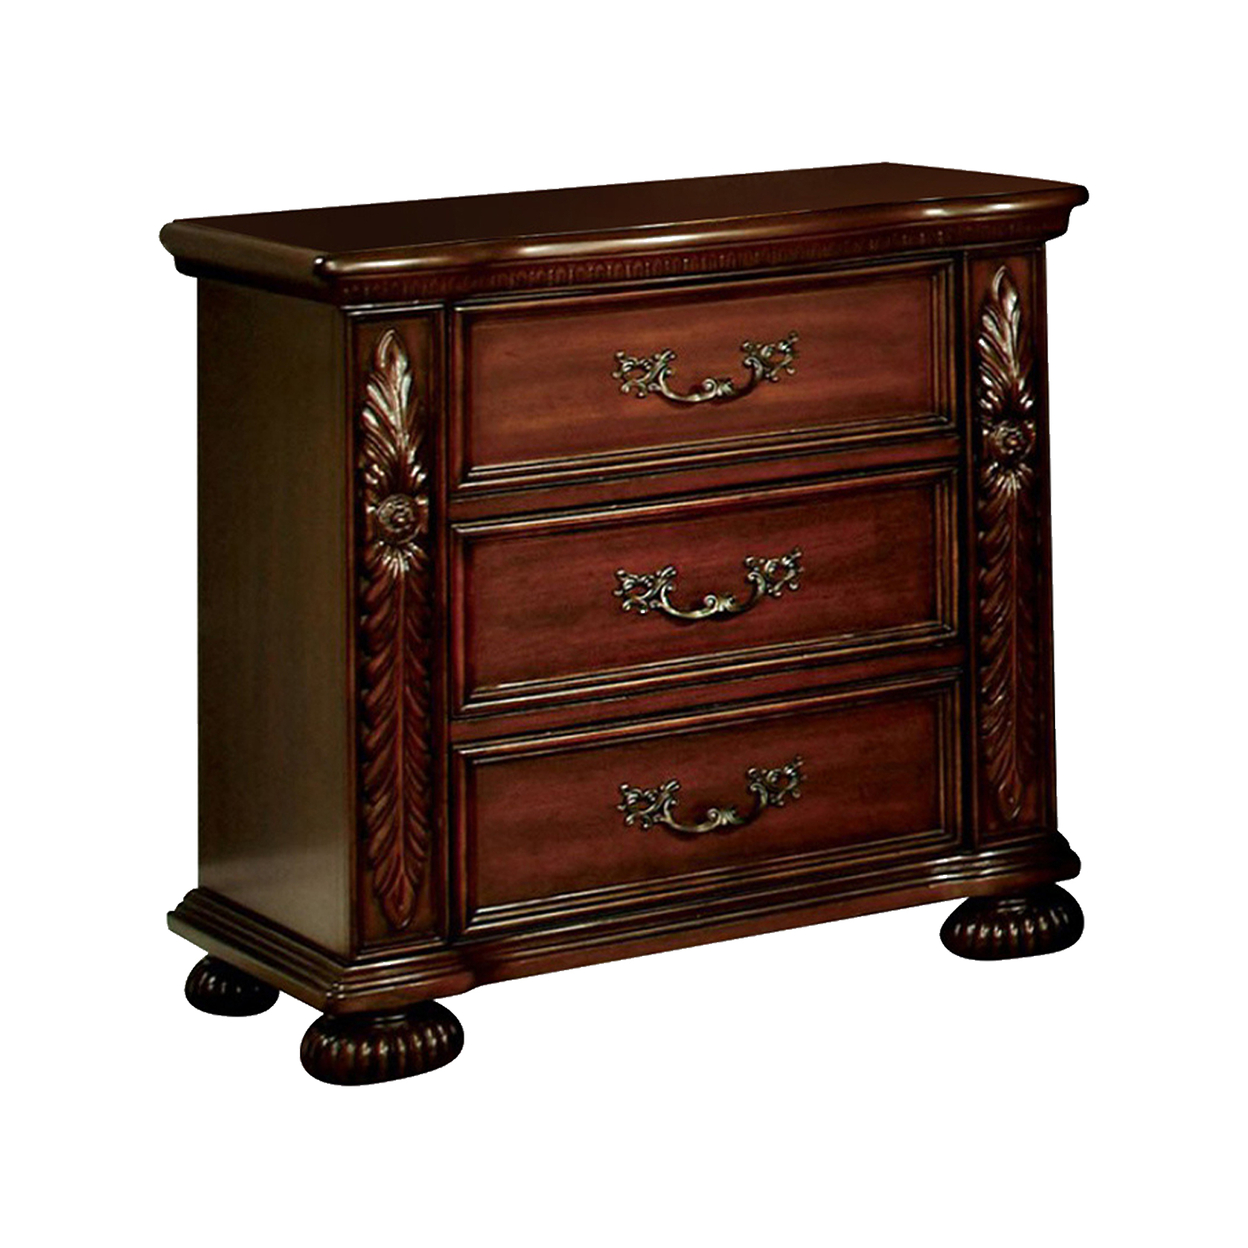 29 Inch Handcrafted Vintage Style Nightstand, 3 Drawers, Carved Trim, Cherry Brown Wood- Saltoro Sherpi